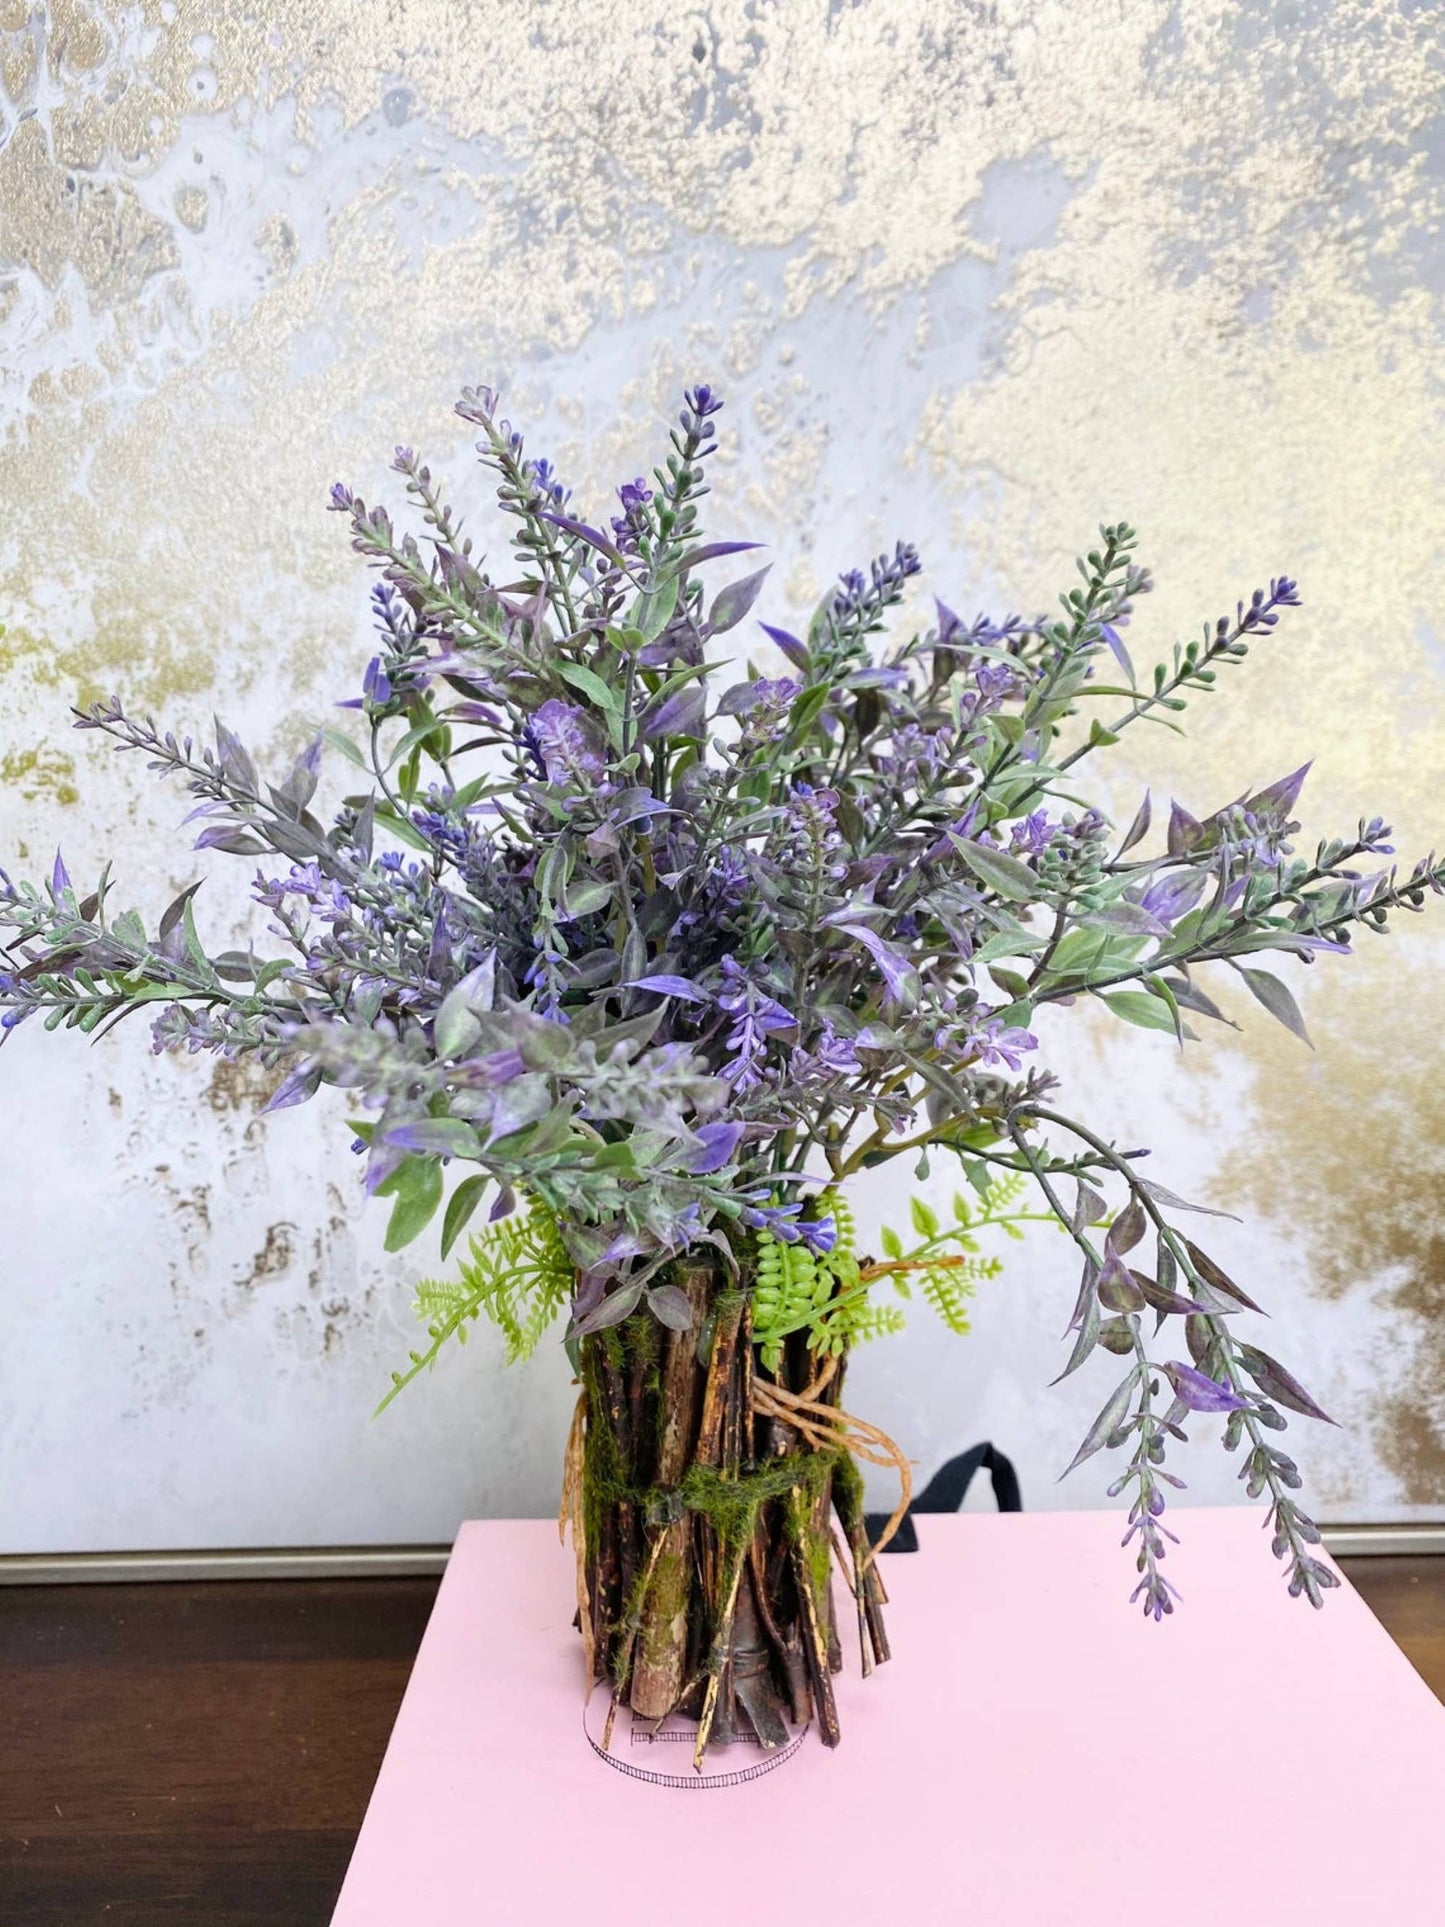 11” Tabletop centerpiece-artificial lavender bamboo stand